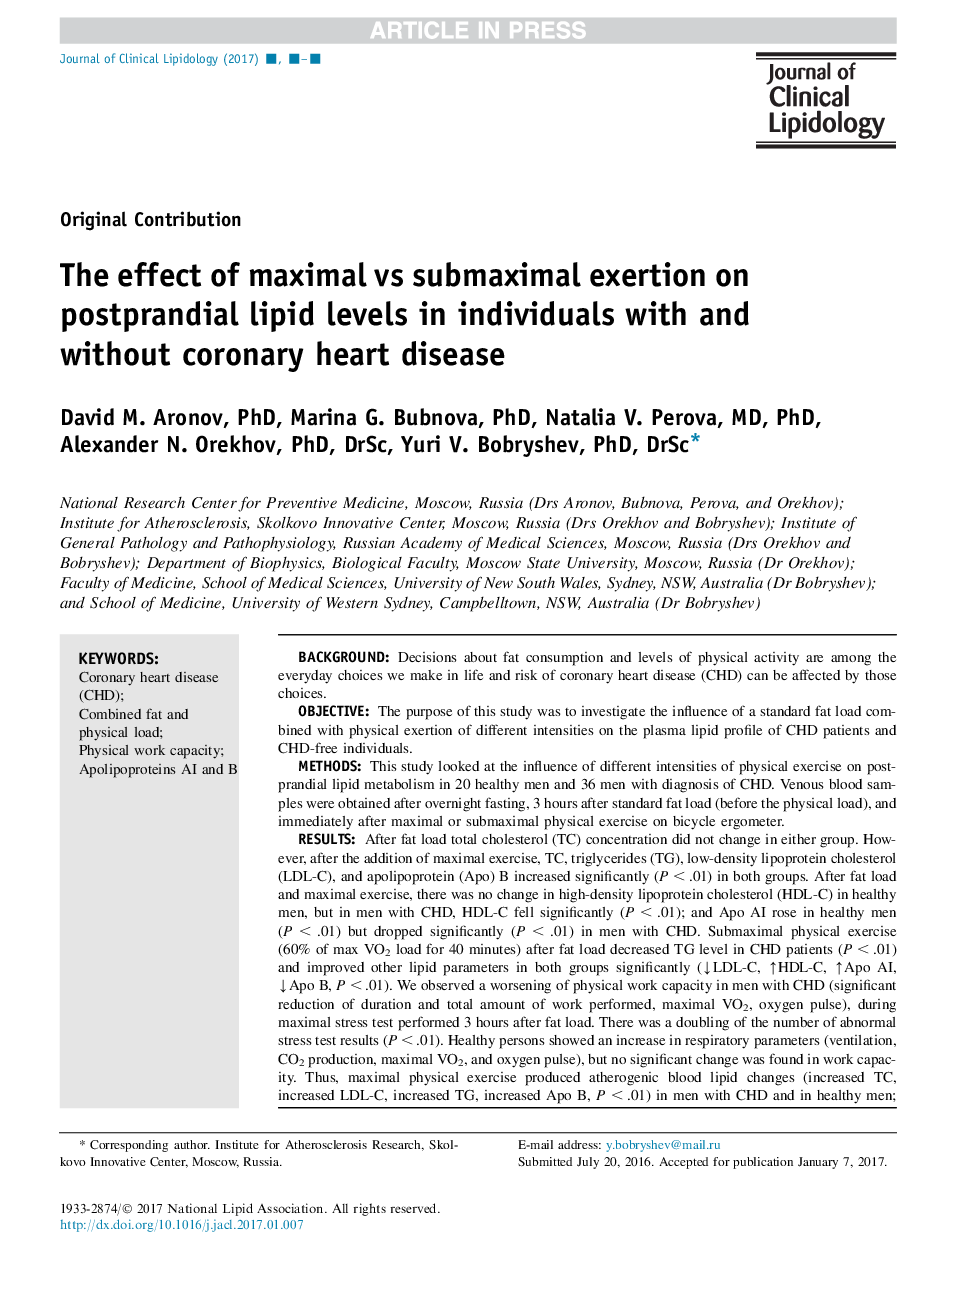 The effect of maximal vs submaximal exertion on postprandial lipid levels in individuals with and without coronary heart disease